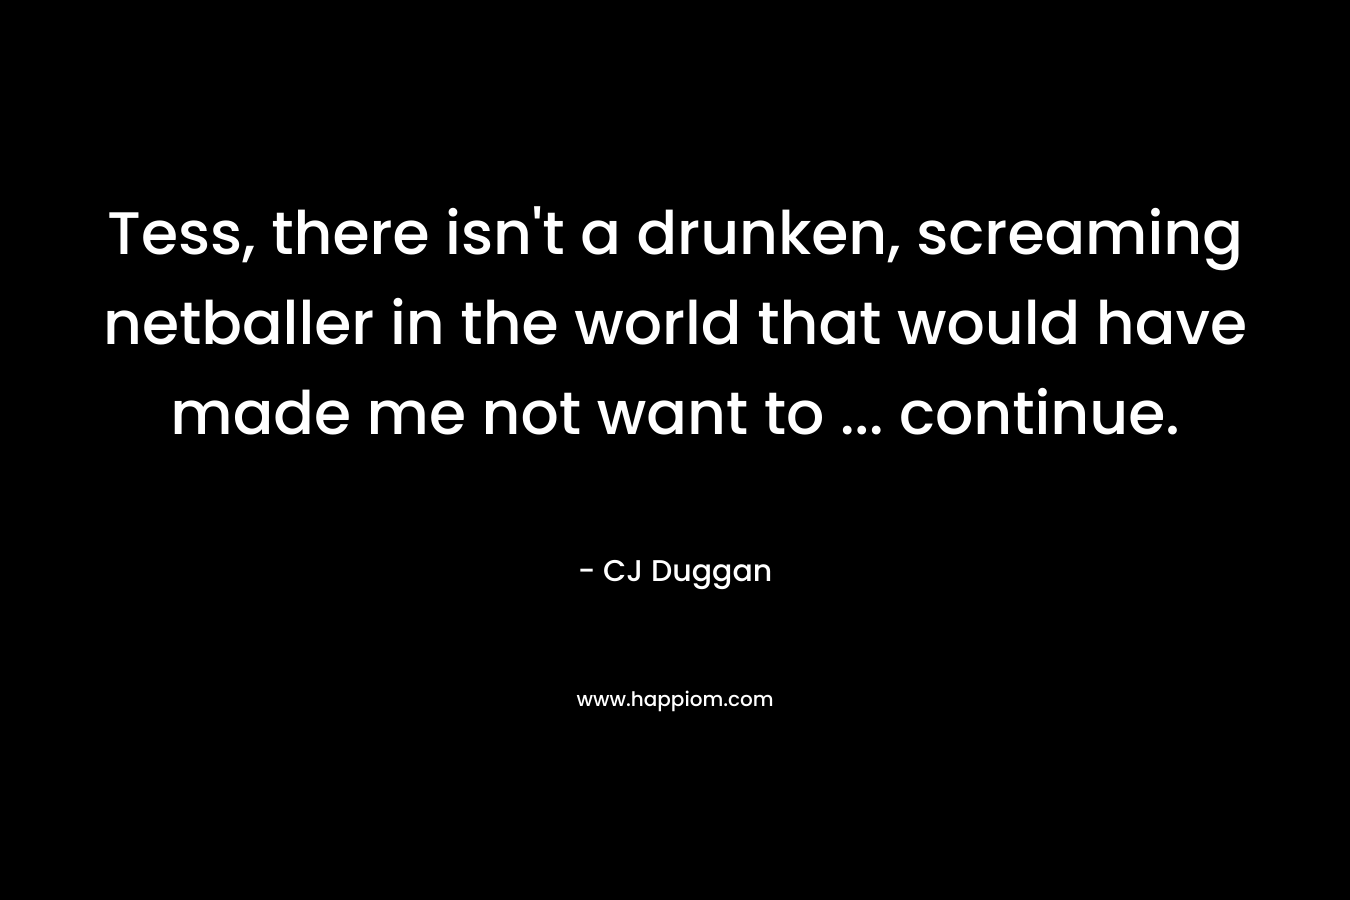 Tess, there isn’t a drunken, screaming netballer in the world that would have made me not want to … continue. – CJ Duggan